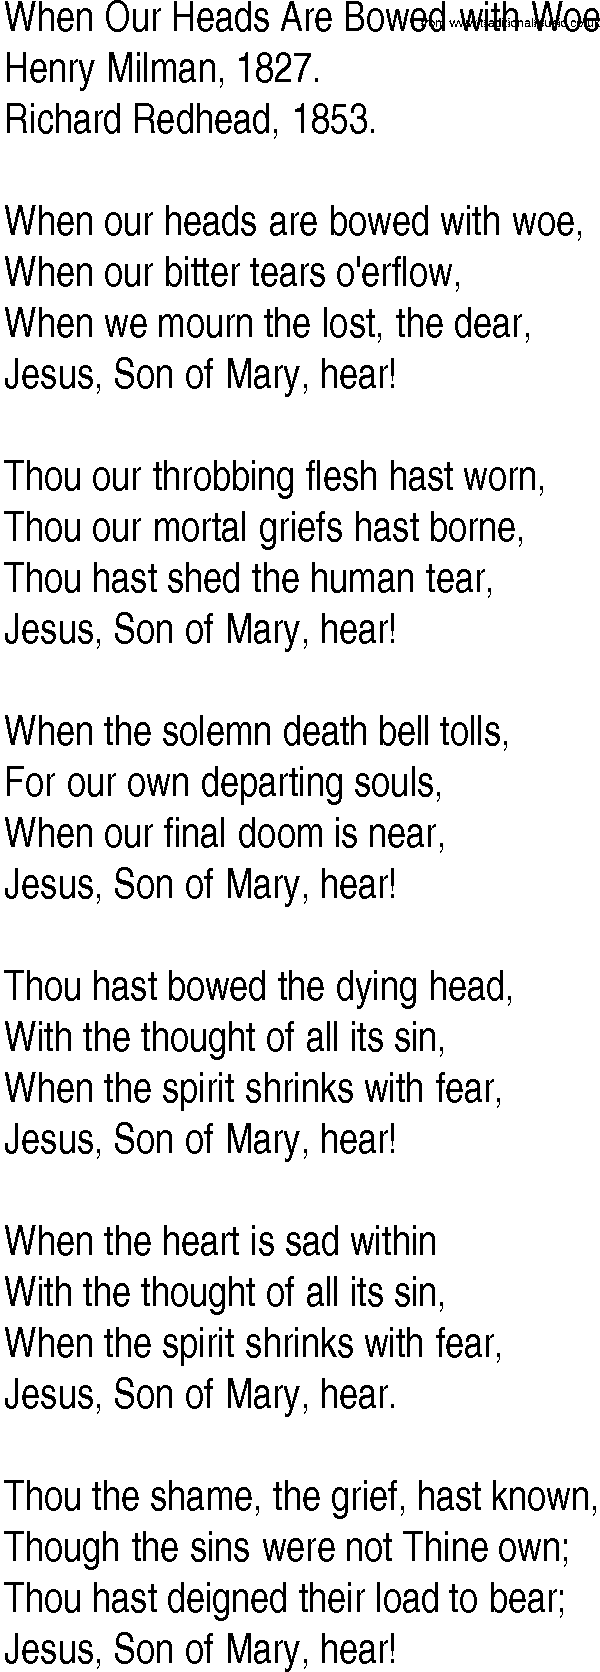 Hymn and Gospel Song: When Our Heads Are Bowed with Woe by Henry Milman lyrics